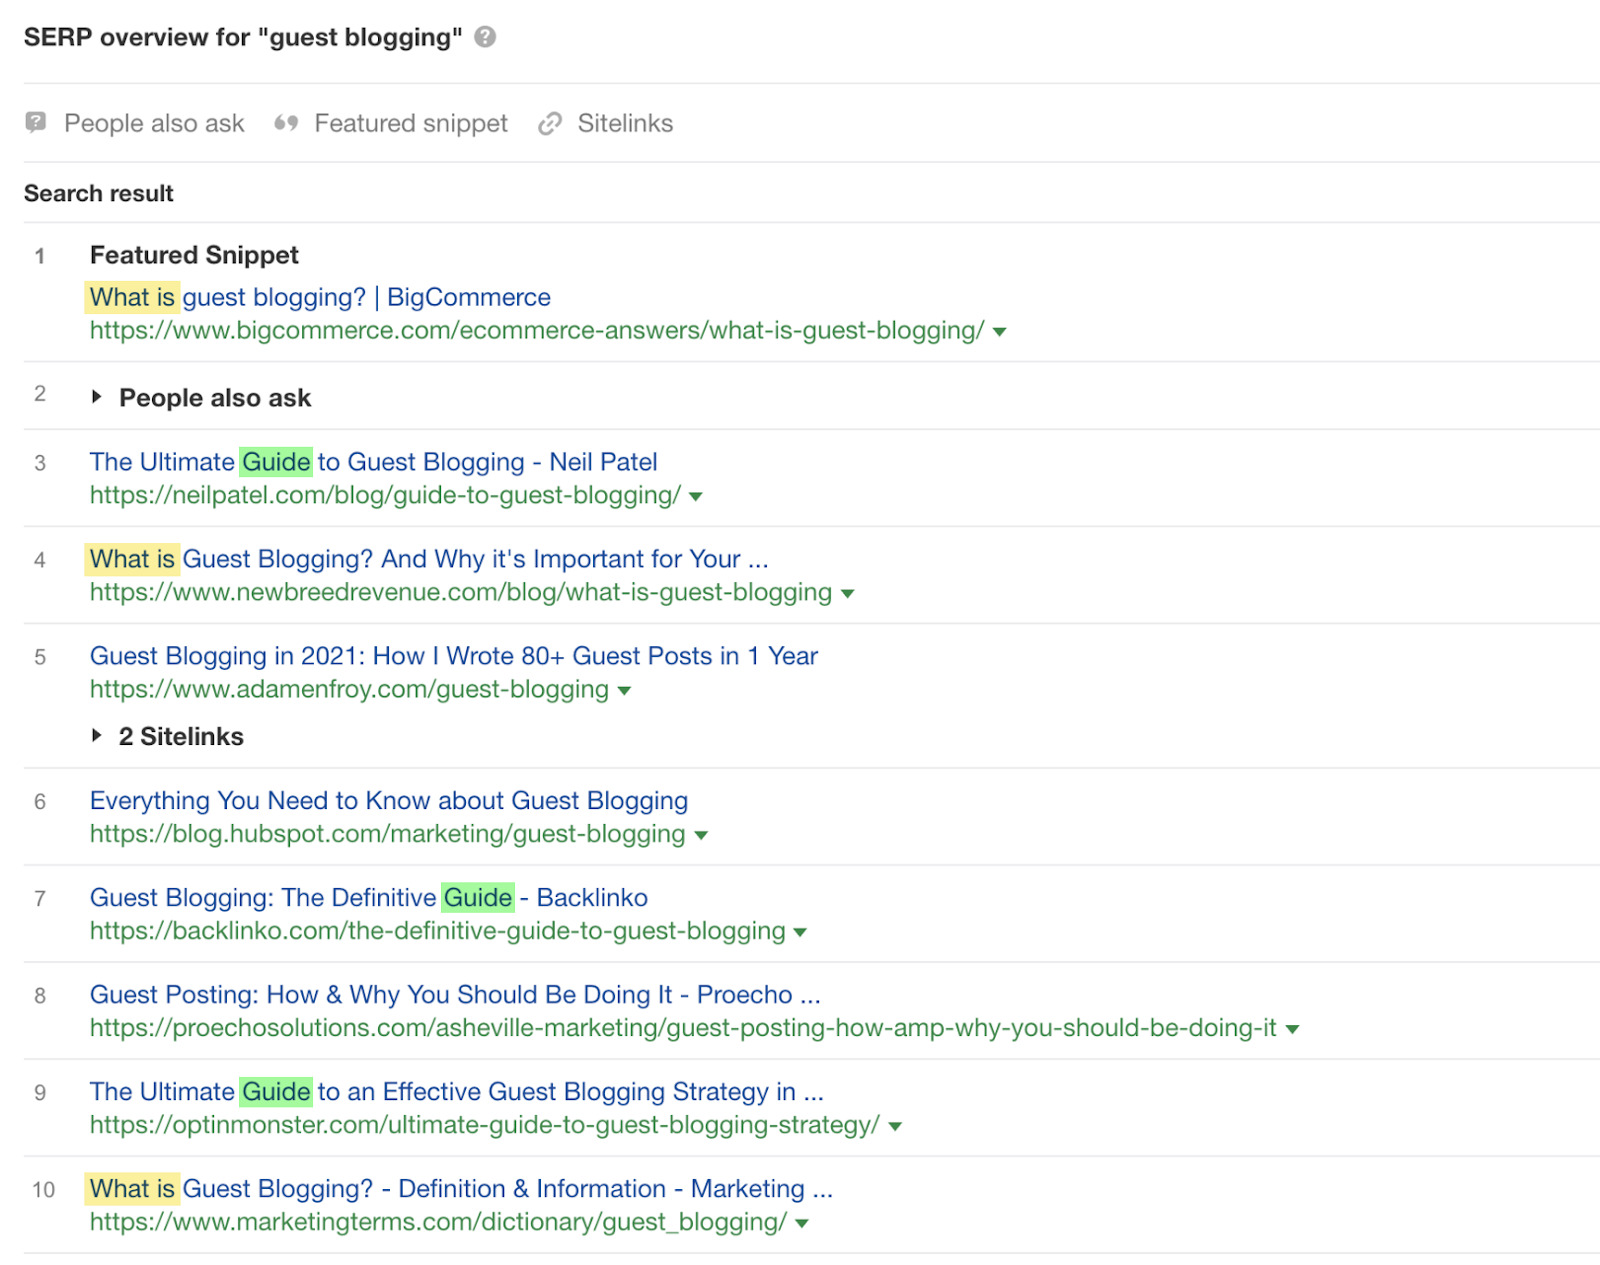 SERP overview for "guest blogging"